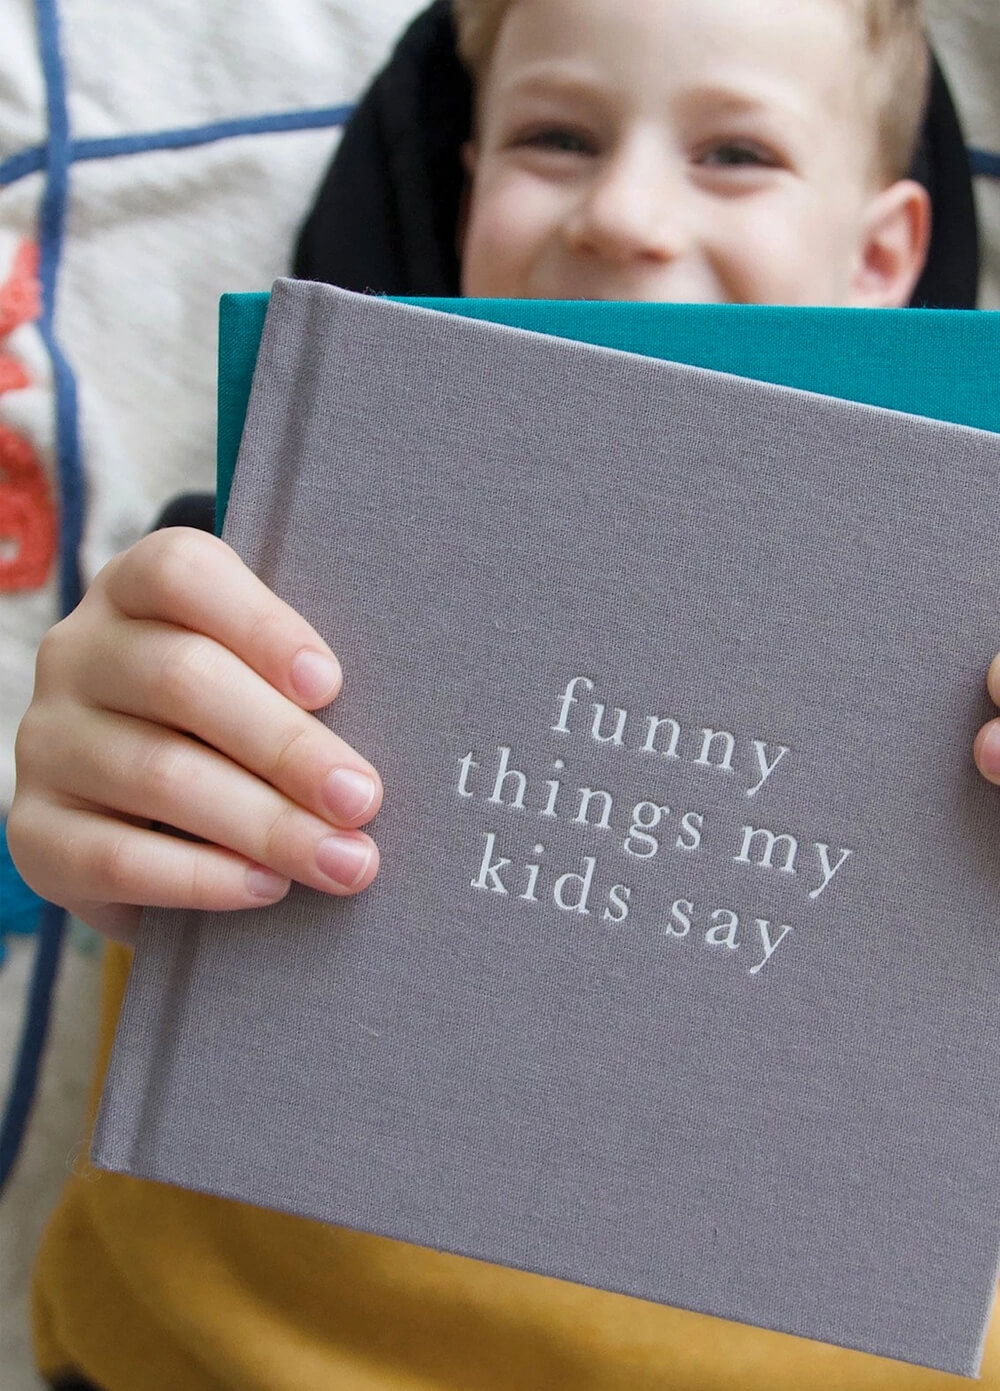 Write to Me - Funny Things My Kids Say Journal - Grey | Queen Bee